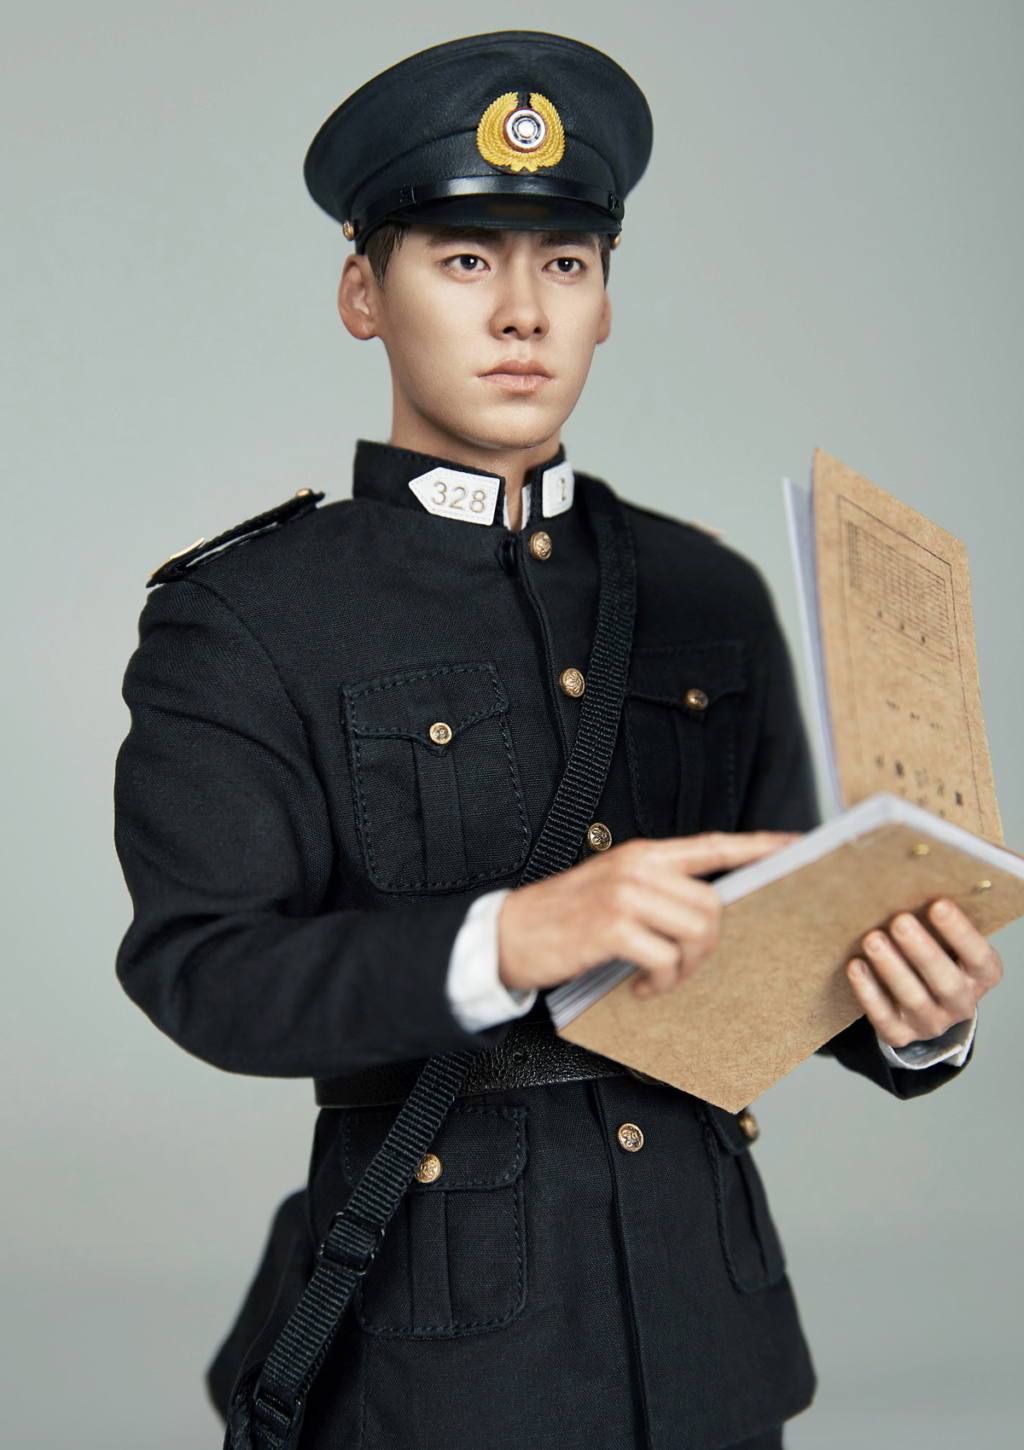 LiYifeng - NEW PRODUCT: Blitzway: 1/6 "Secret and Great"-Gu Yaodong (played by Li Yifeng) Action Figure 16291411